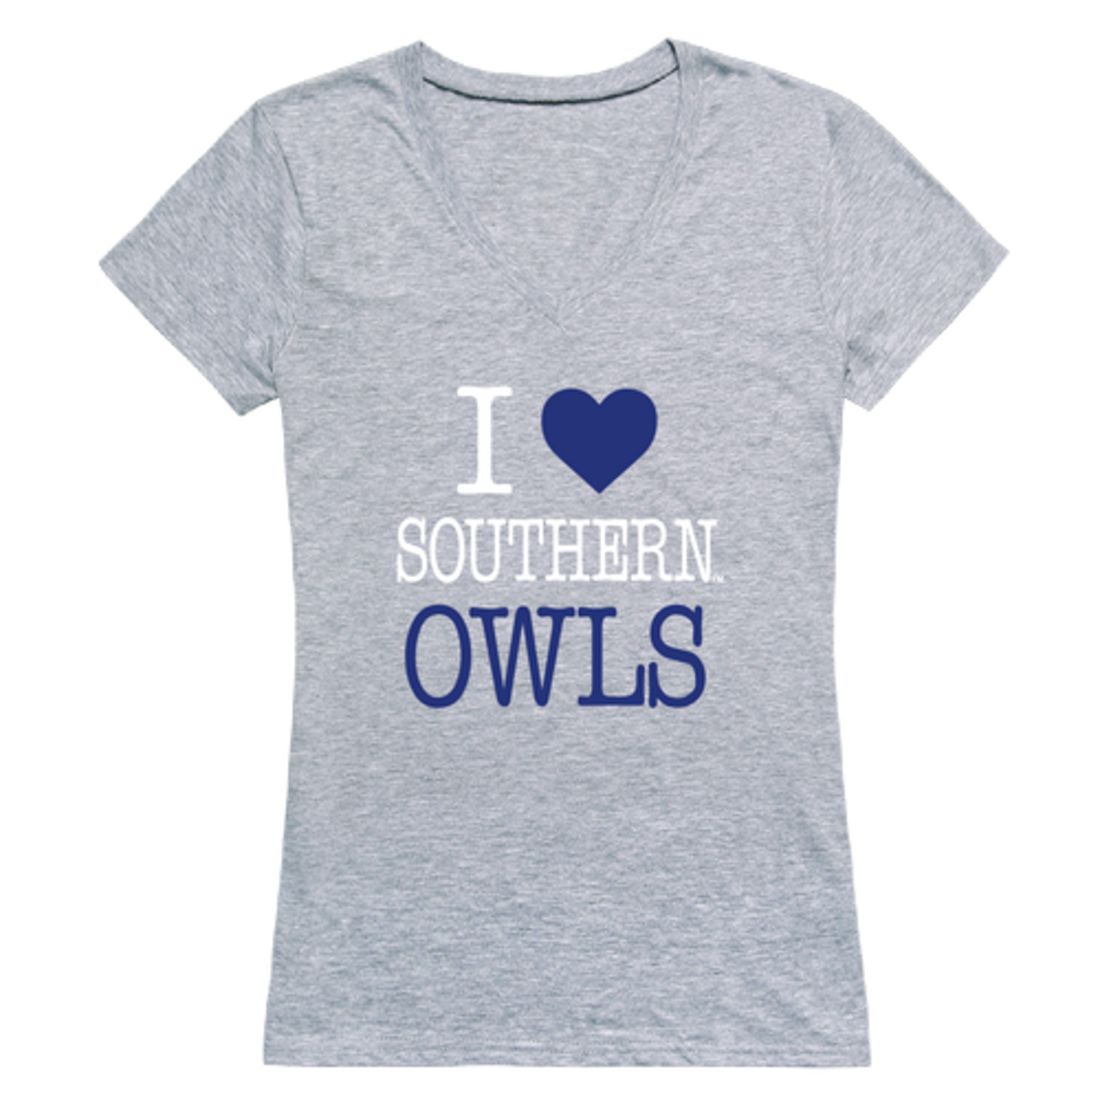 I Love Southern Connecticut State University Owls Womens T-Shirt Tee